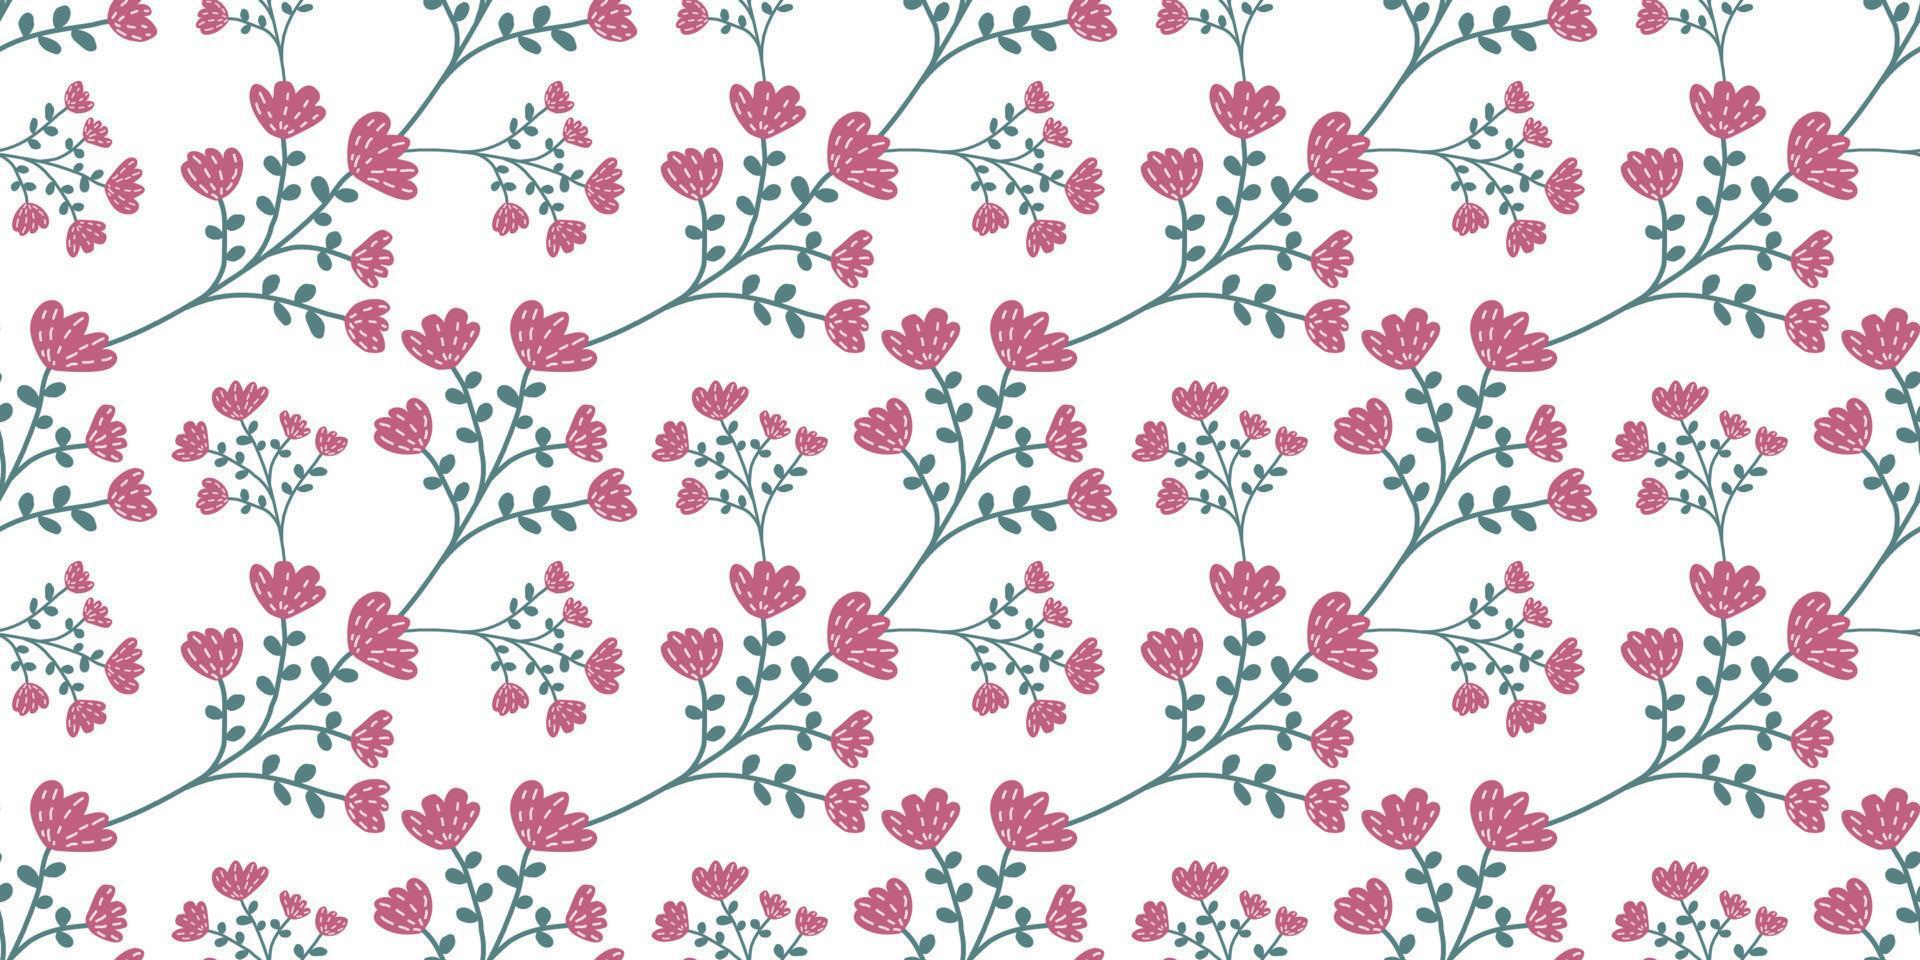 A collection of seamless floral patterns, white background doodle style vector